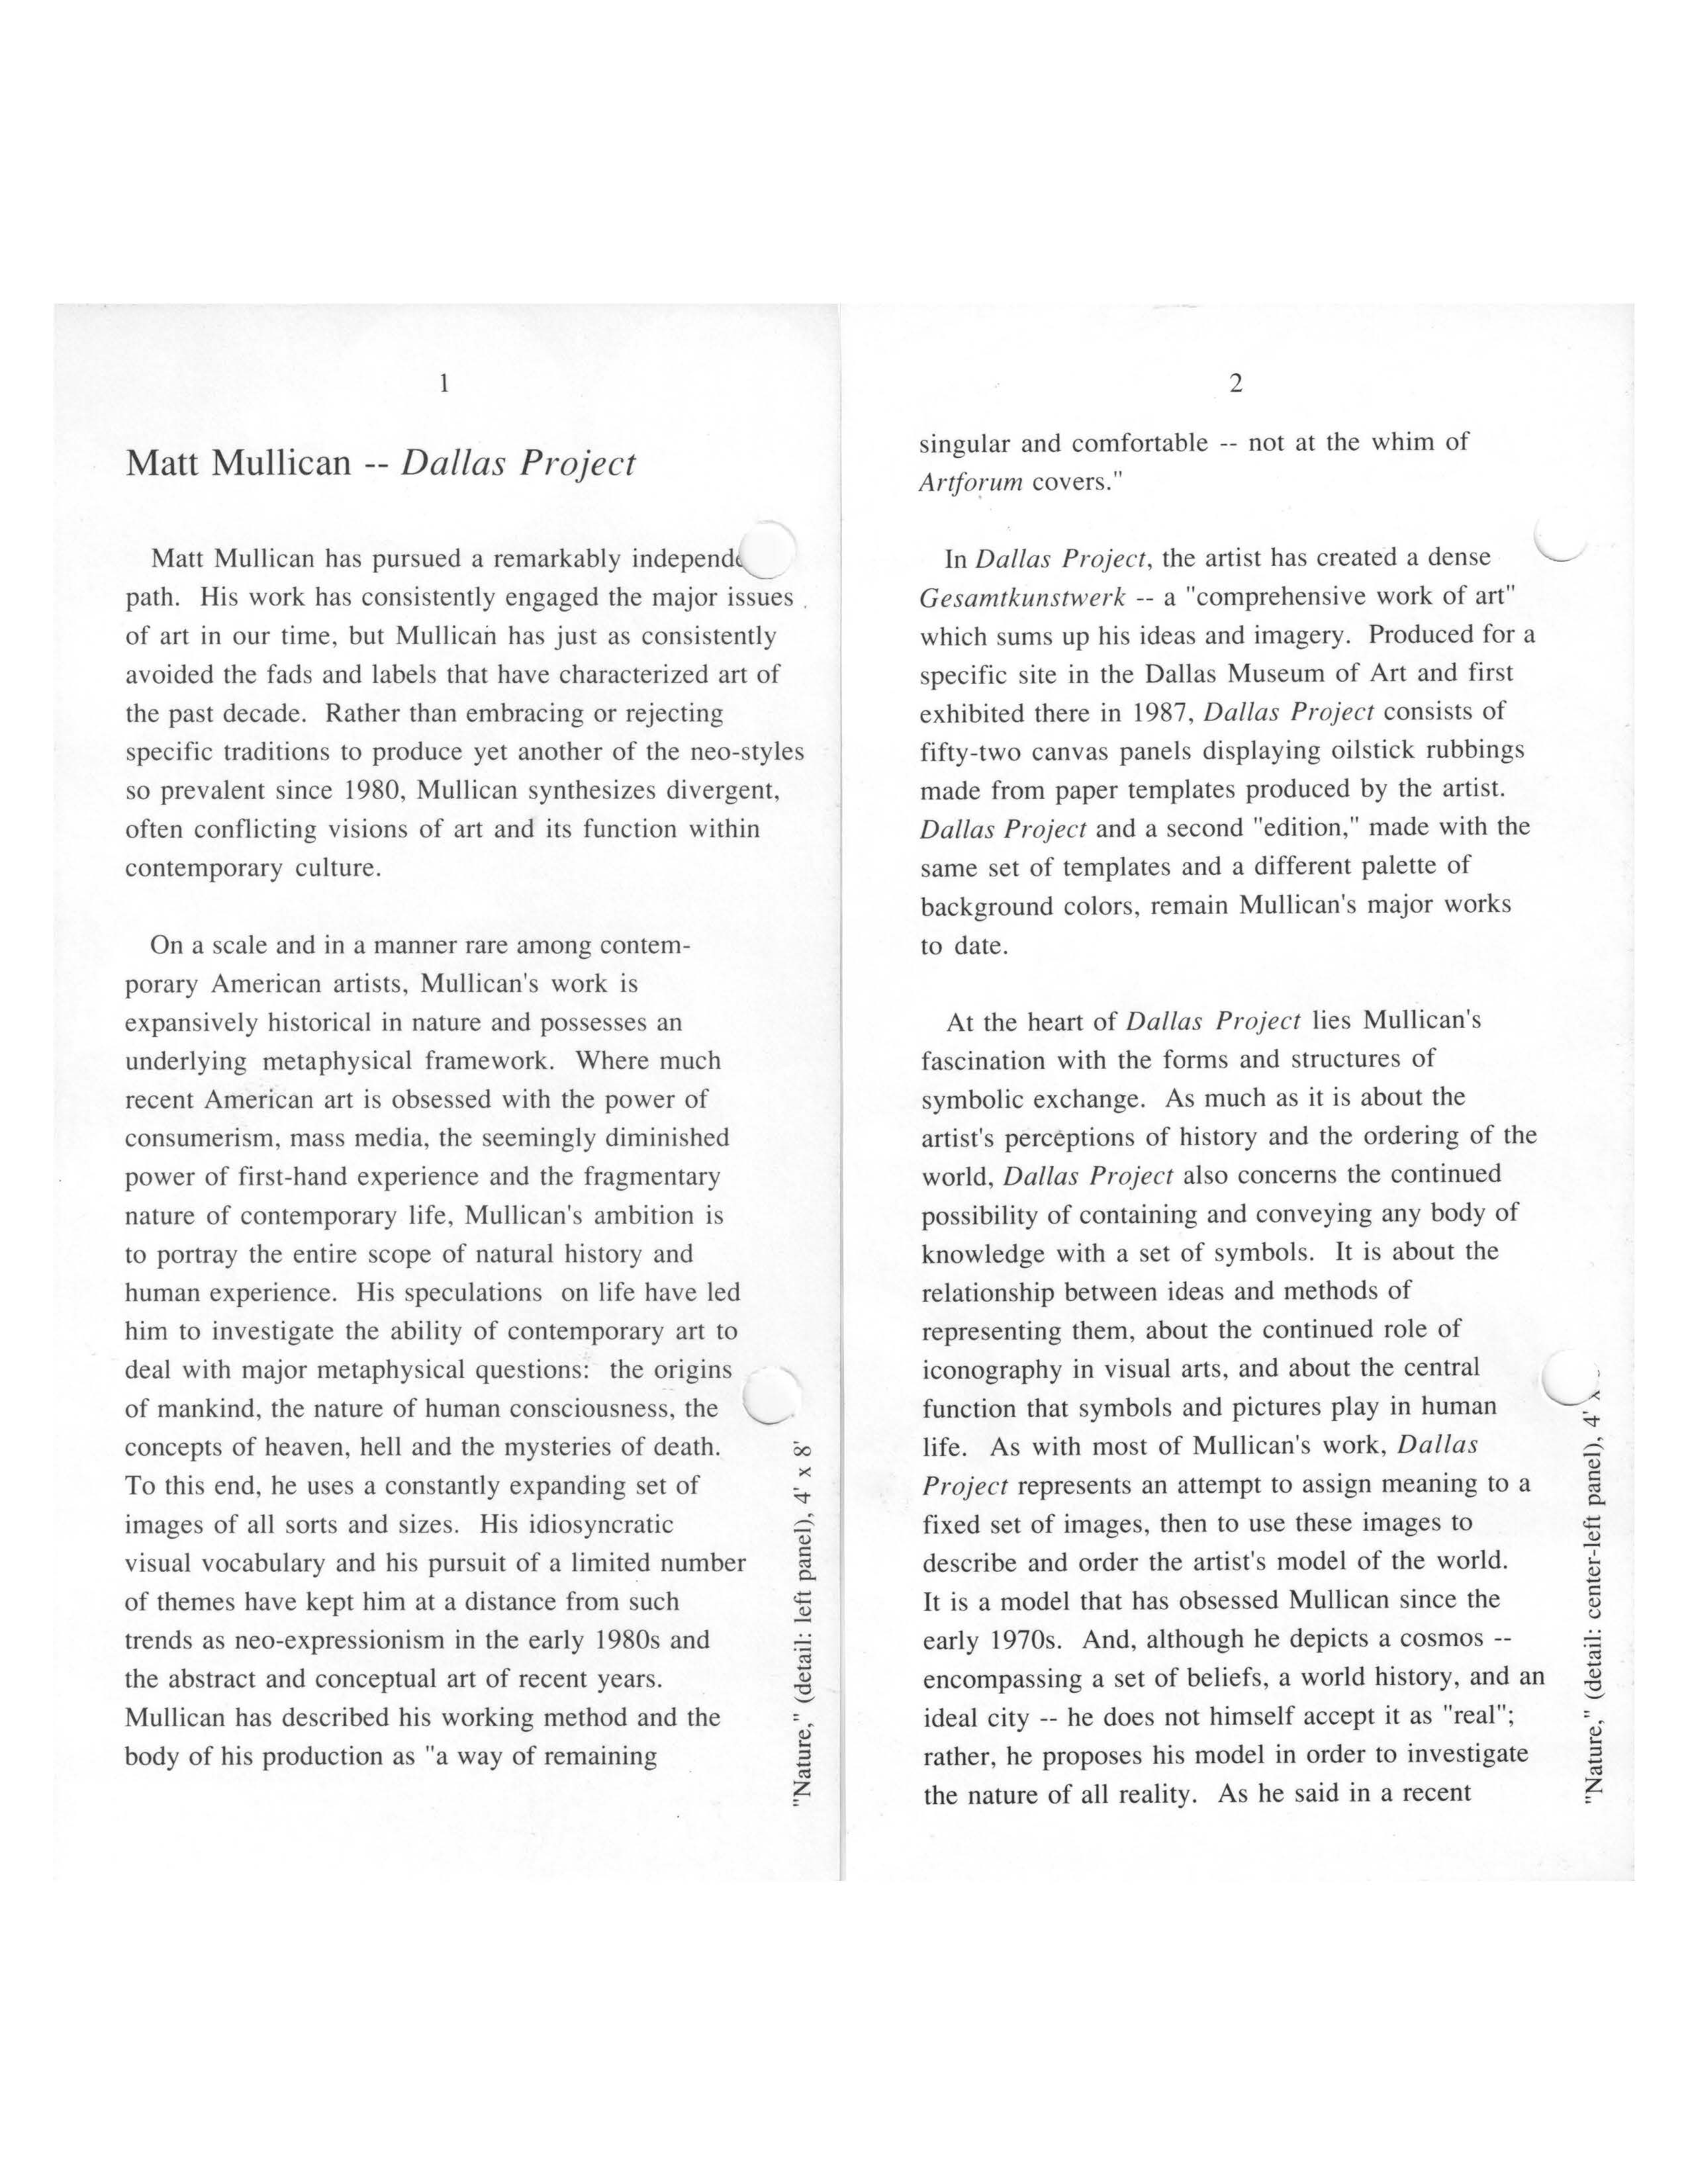 Image of text link to full text pdf